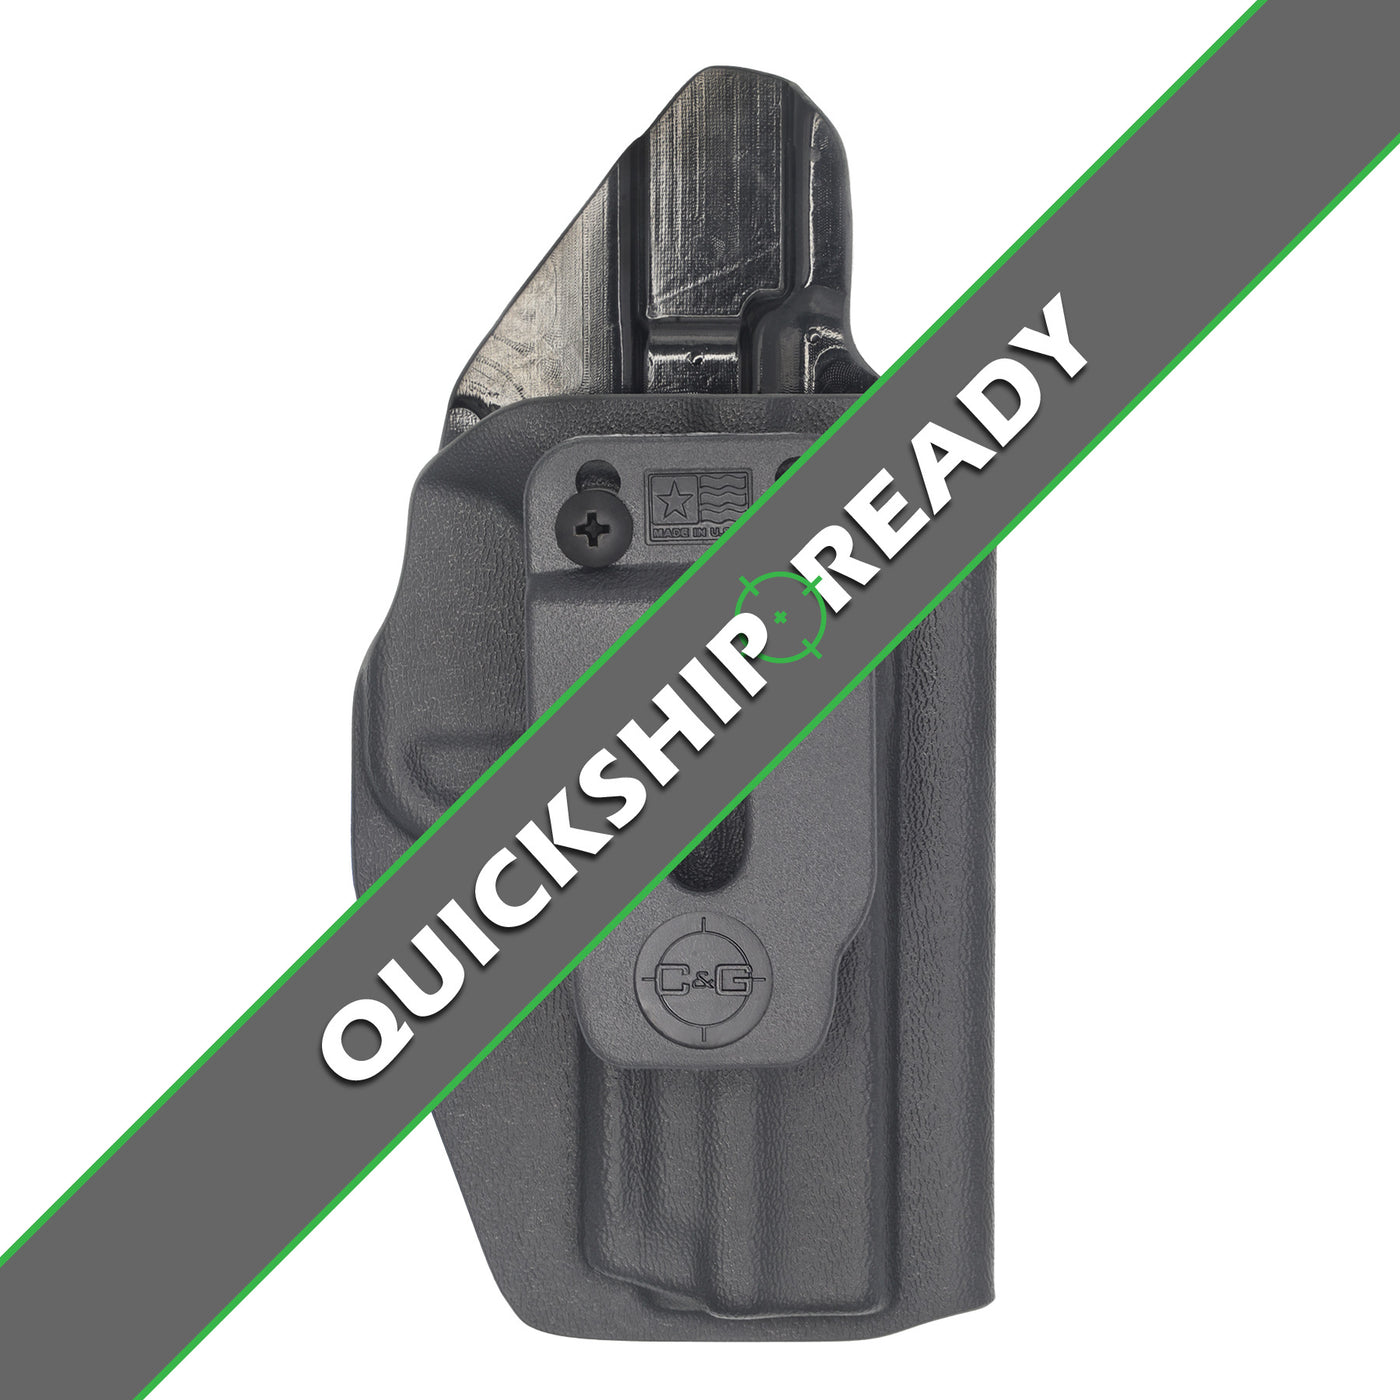 C&G Holsters quickship IWB inside the waistband Holster for the Smith & Wesson M&P Shield EZ